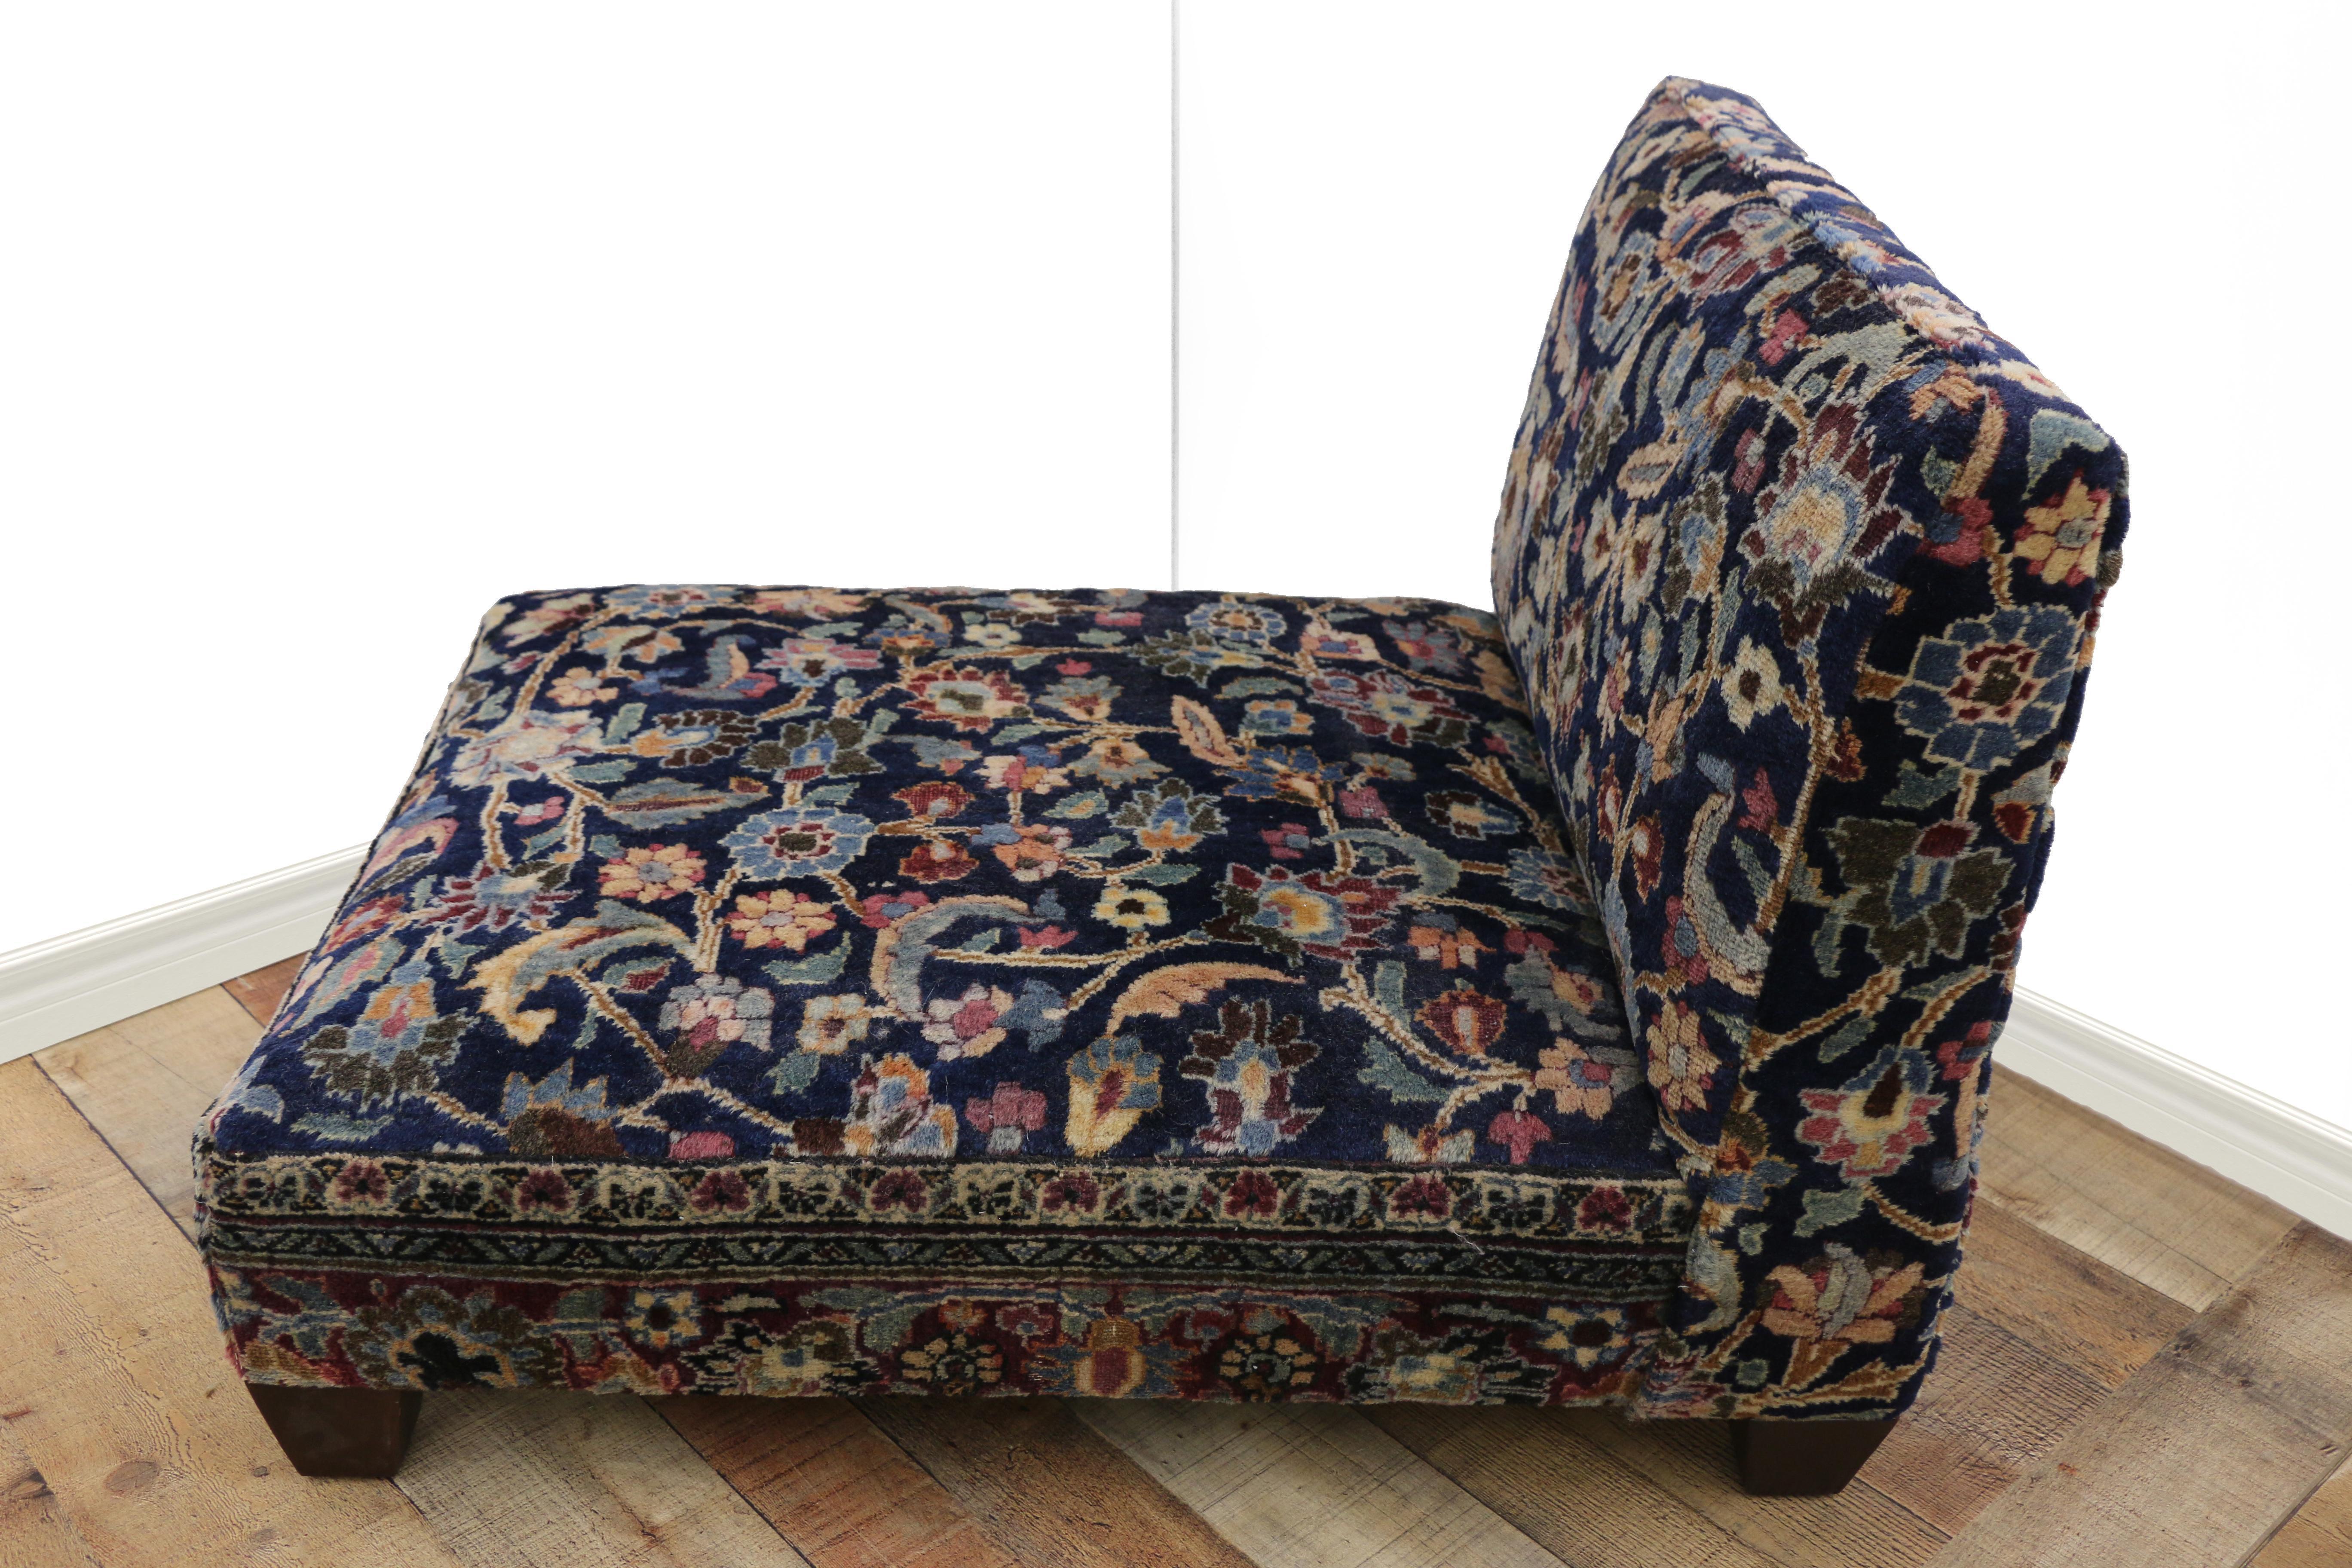 Hand-Knotted Low Profile Slipper Chair or Persian Petbed from Antique Persian Khorassan Rug